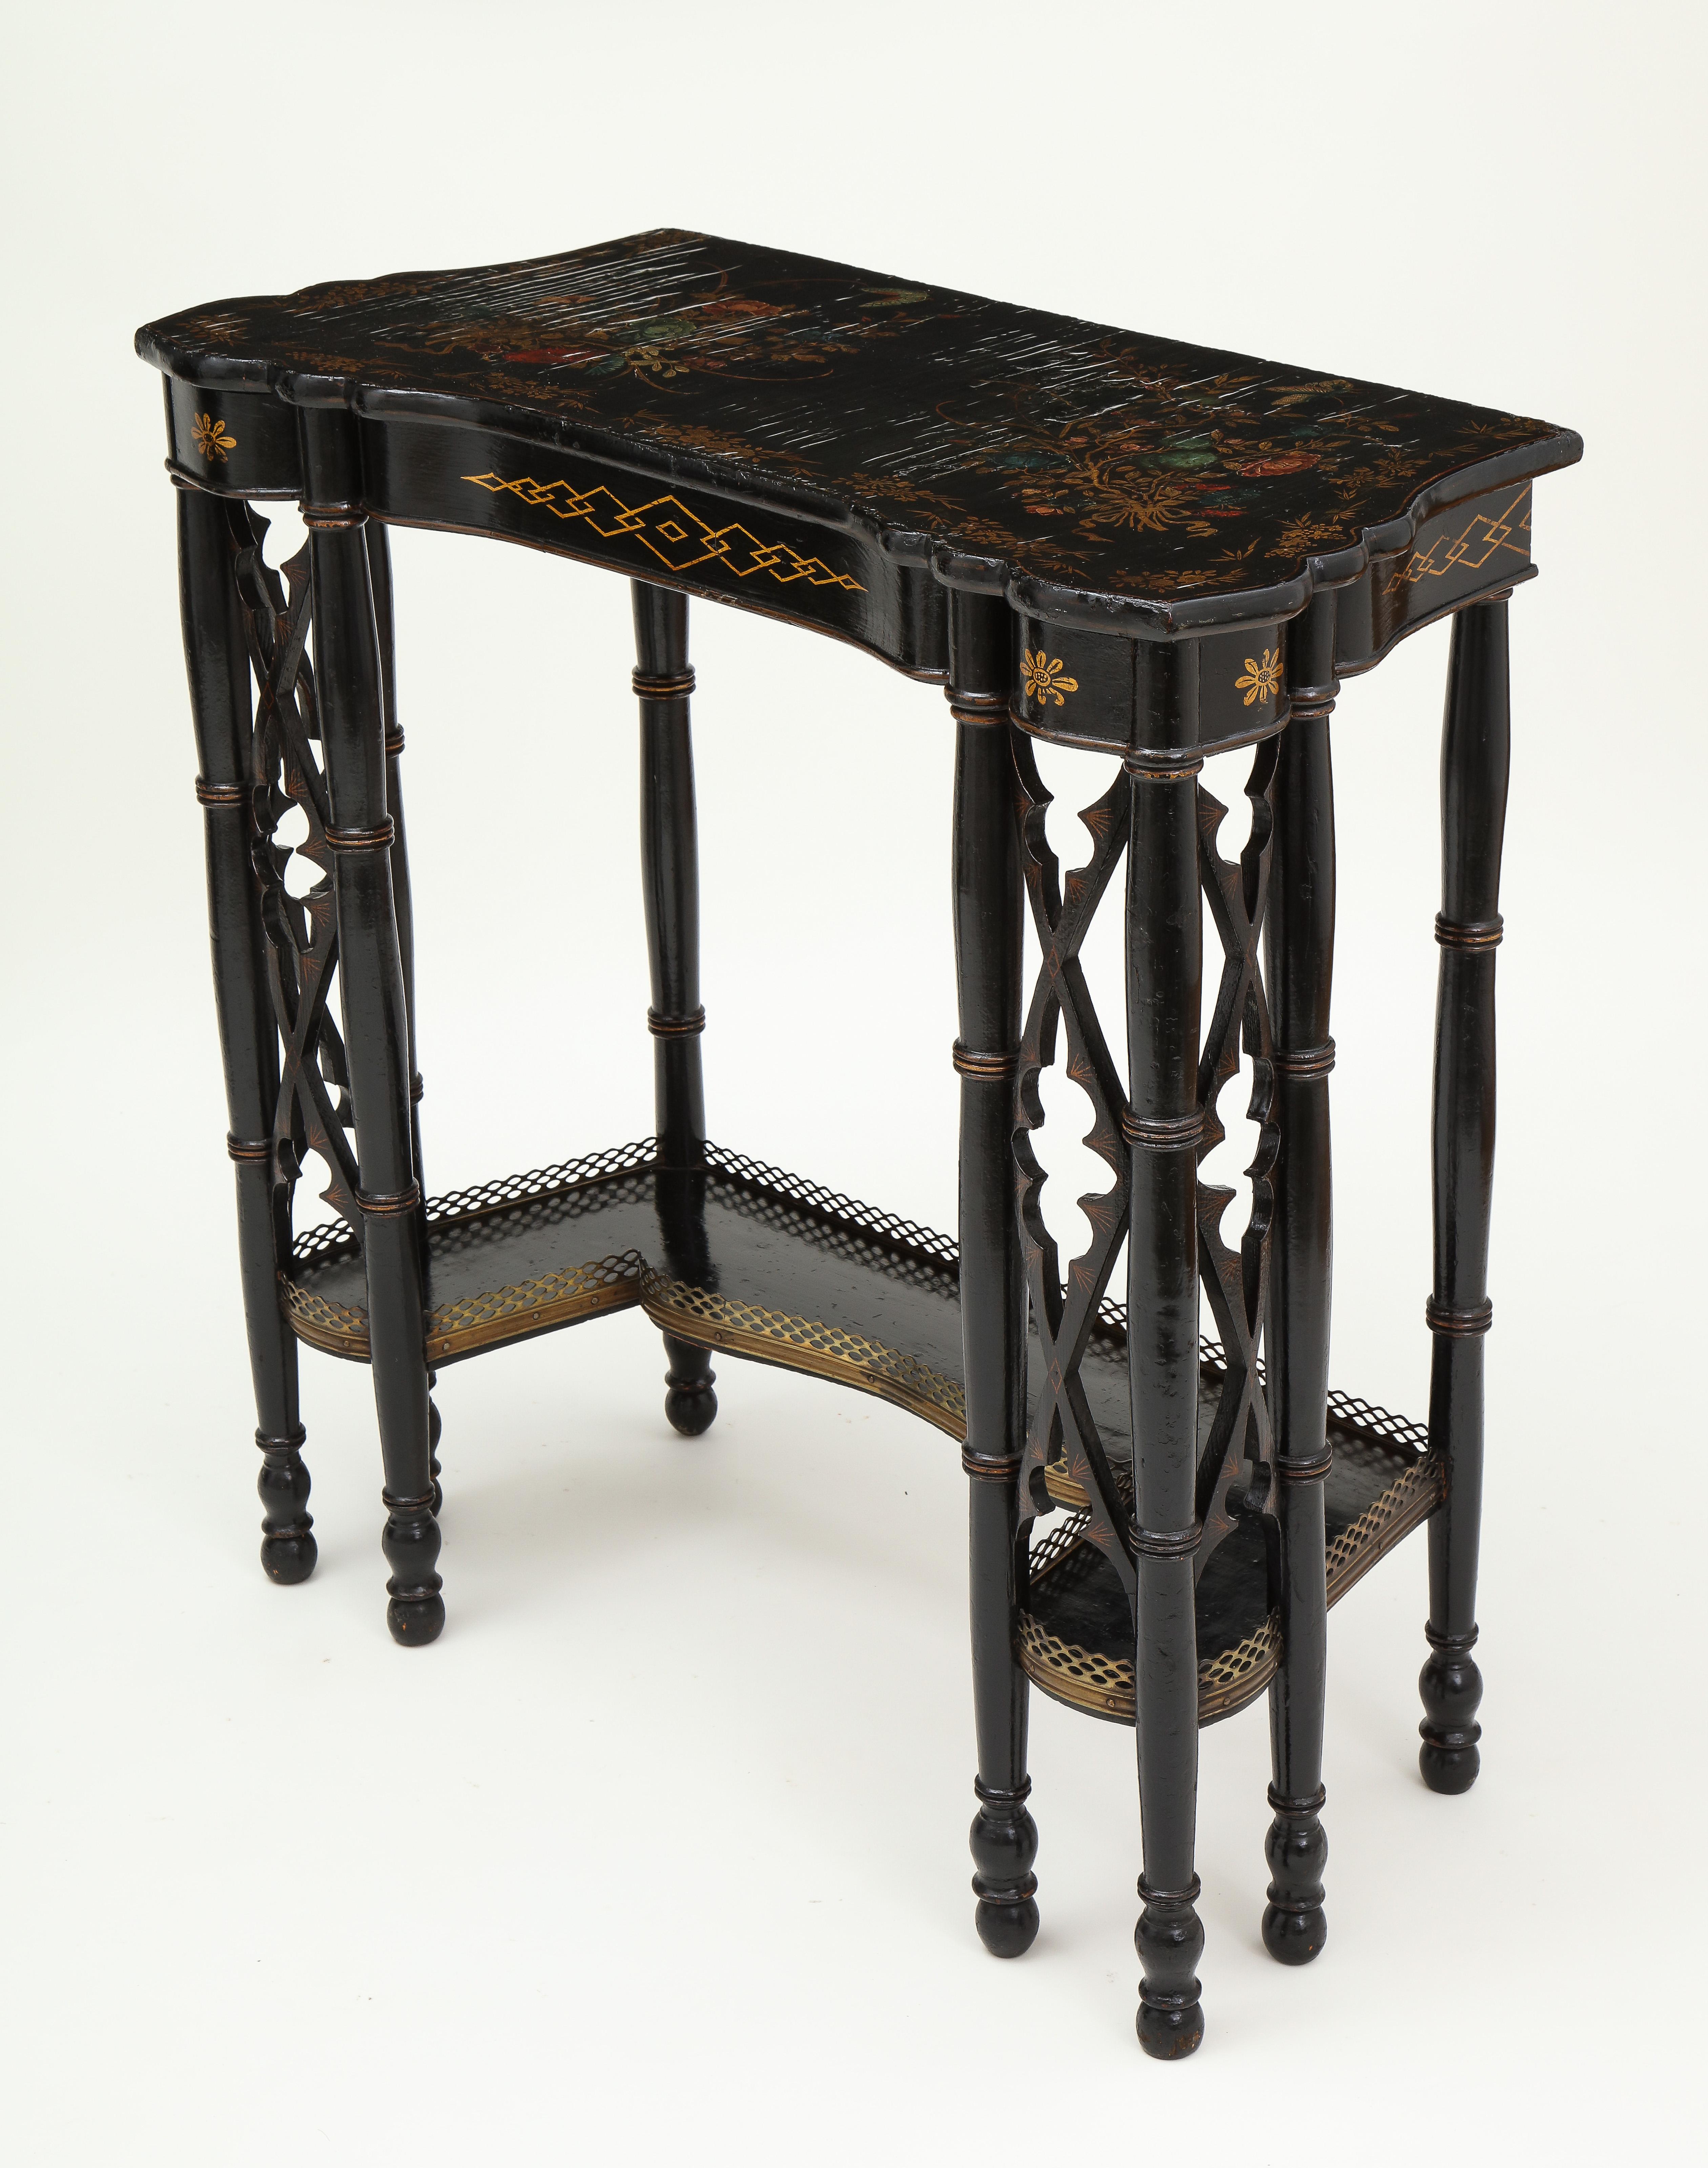 English Pair of Fine Regency Black Painted and Chinese Lacquer Side Tables